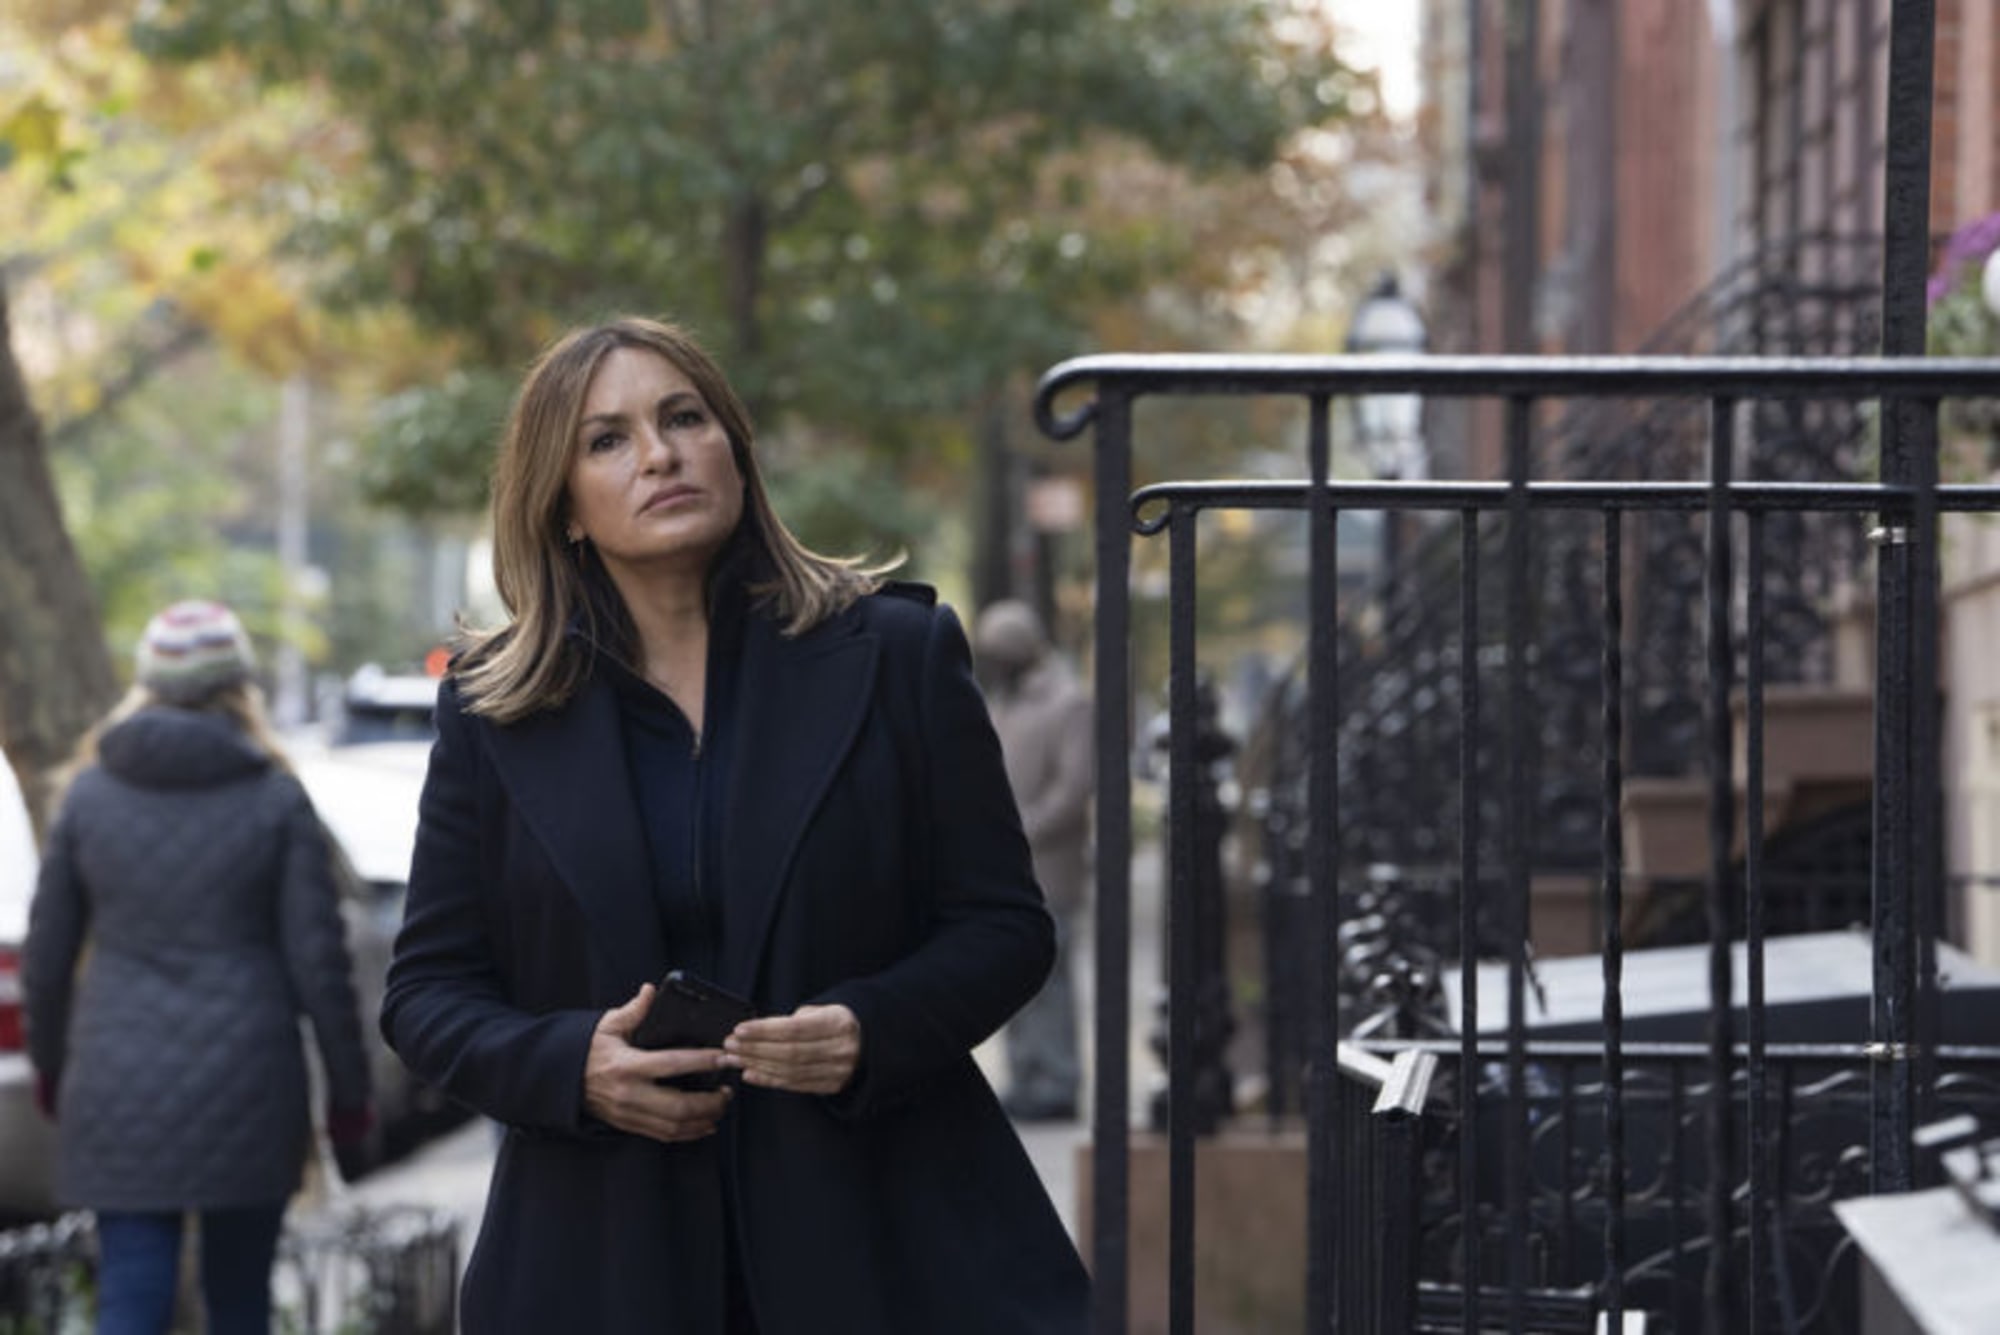 law and order svu season 6 episode 20